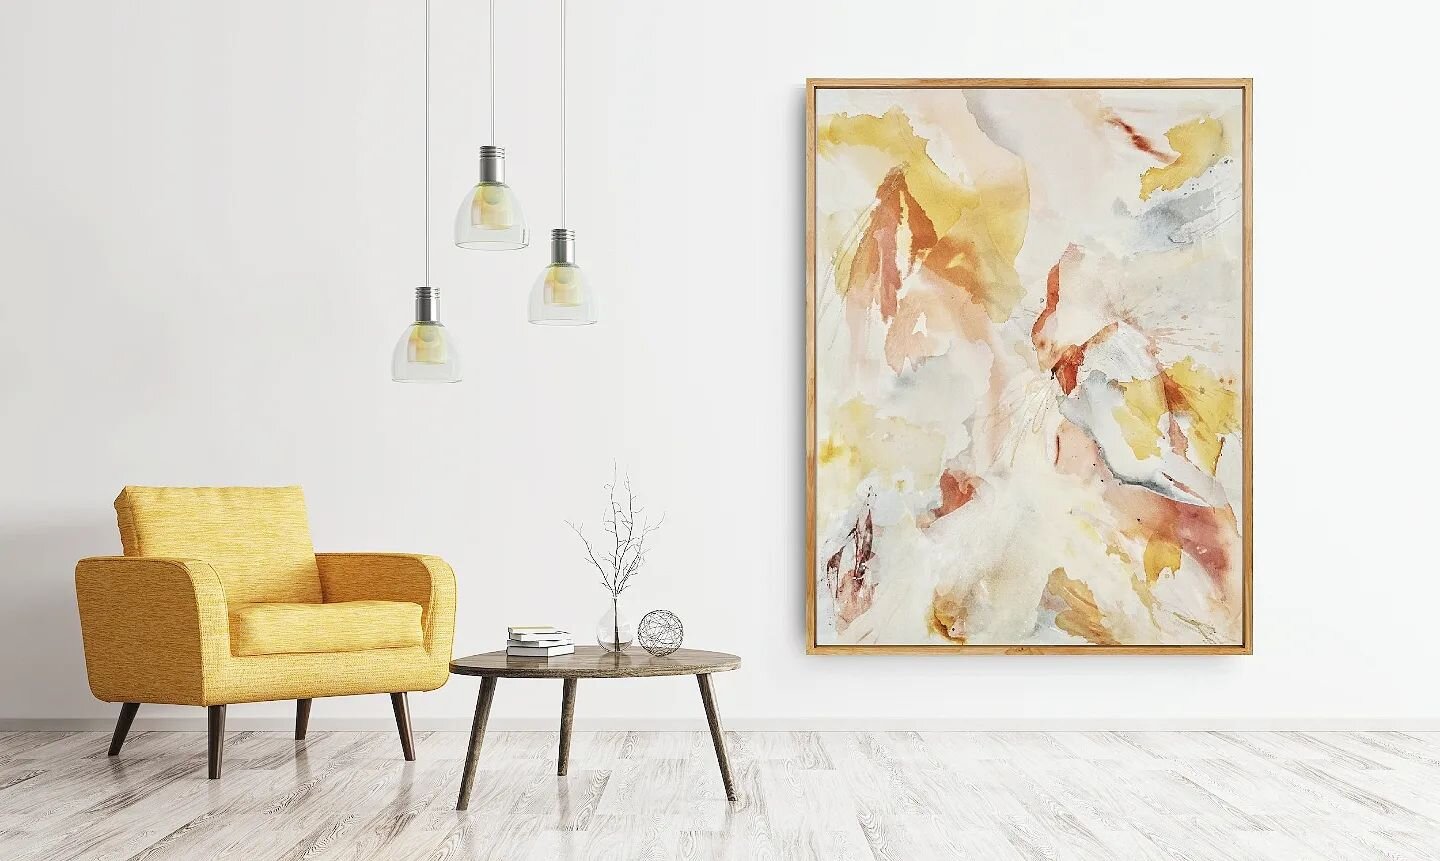 &quot;Not Winter Yet&quot;
46x60 on raw canvas.
Framed in white ash.
Available on my website.

46x60, encadr&eacute; en fr&ecirc;ne blanc. Disponible sur mon site web.

.
.
.
.
#interiordesignersmontreal #acrylicpaint #canadianartist #montrealartist 